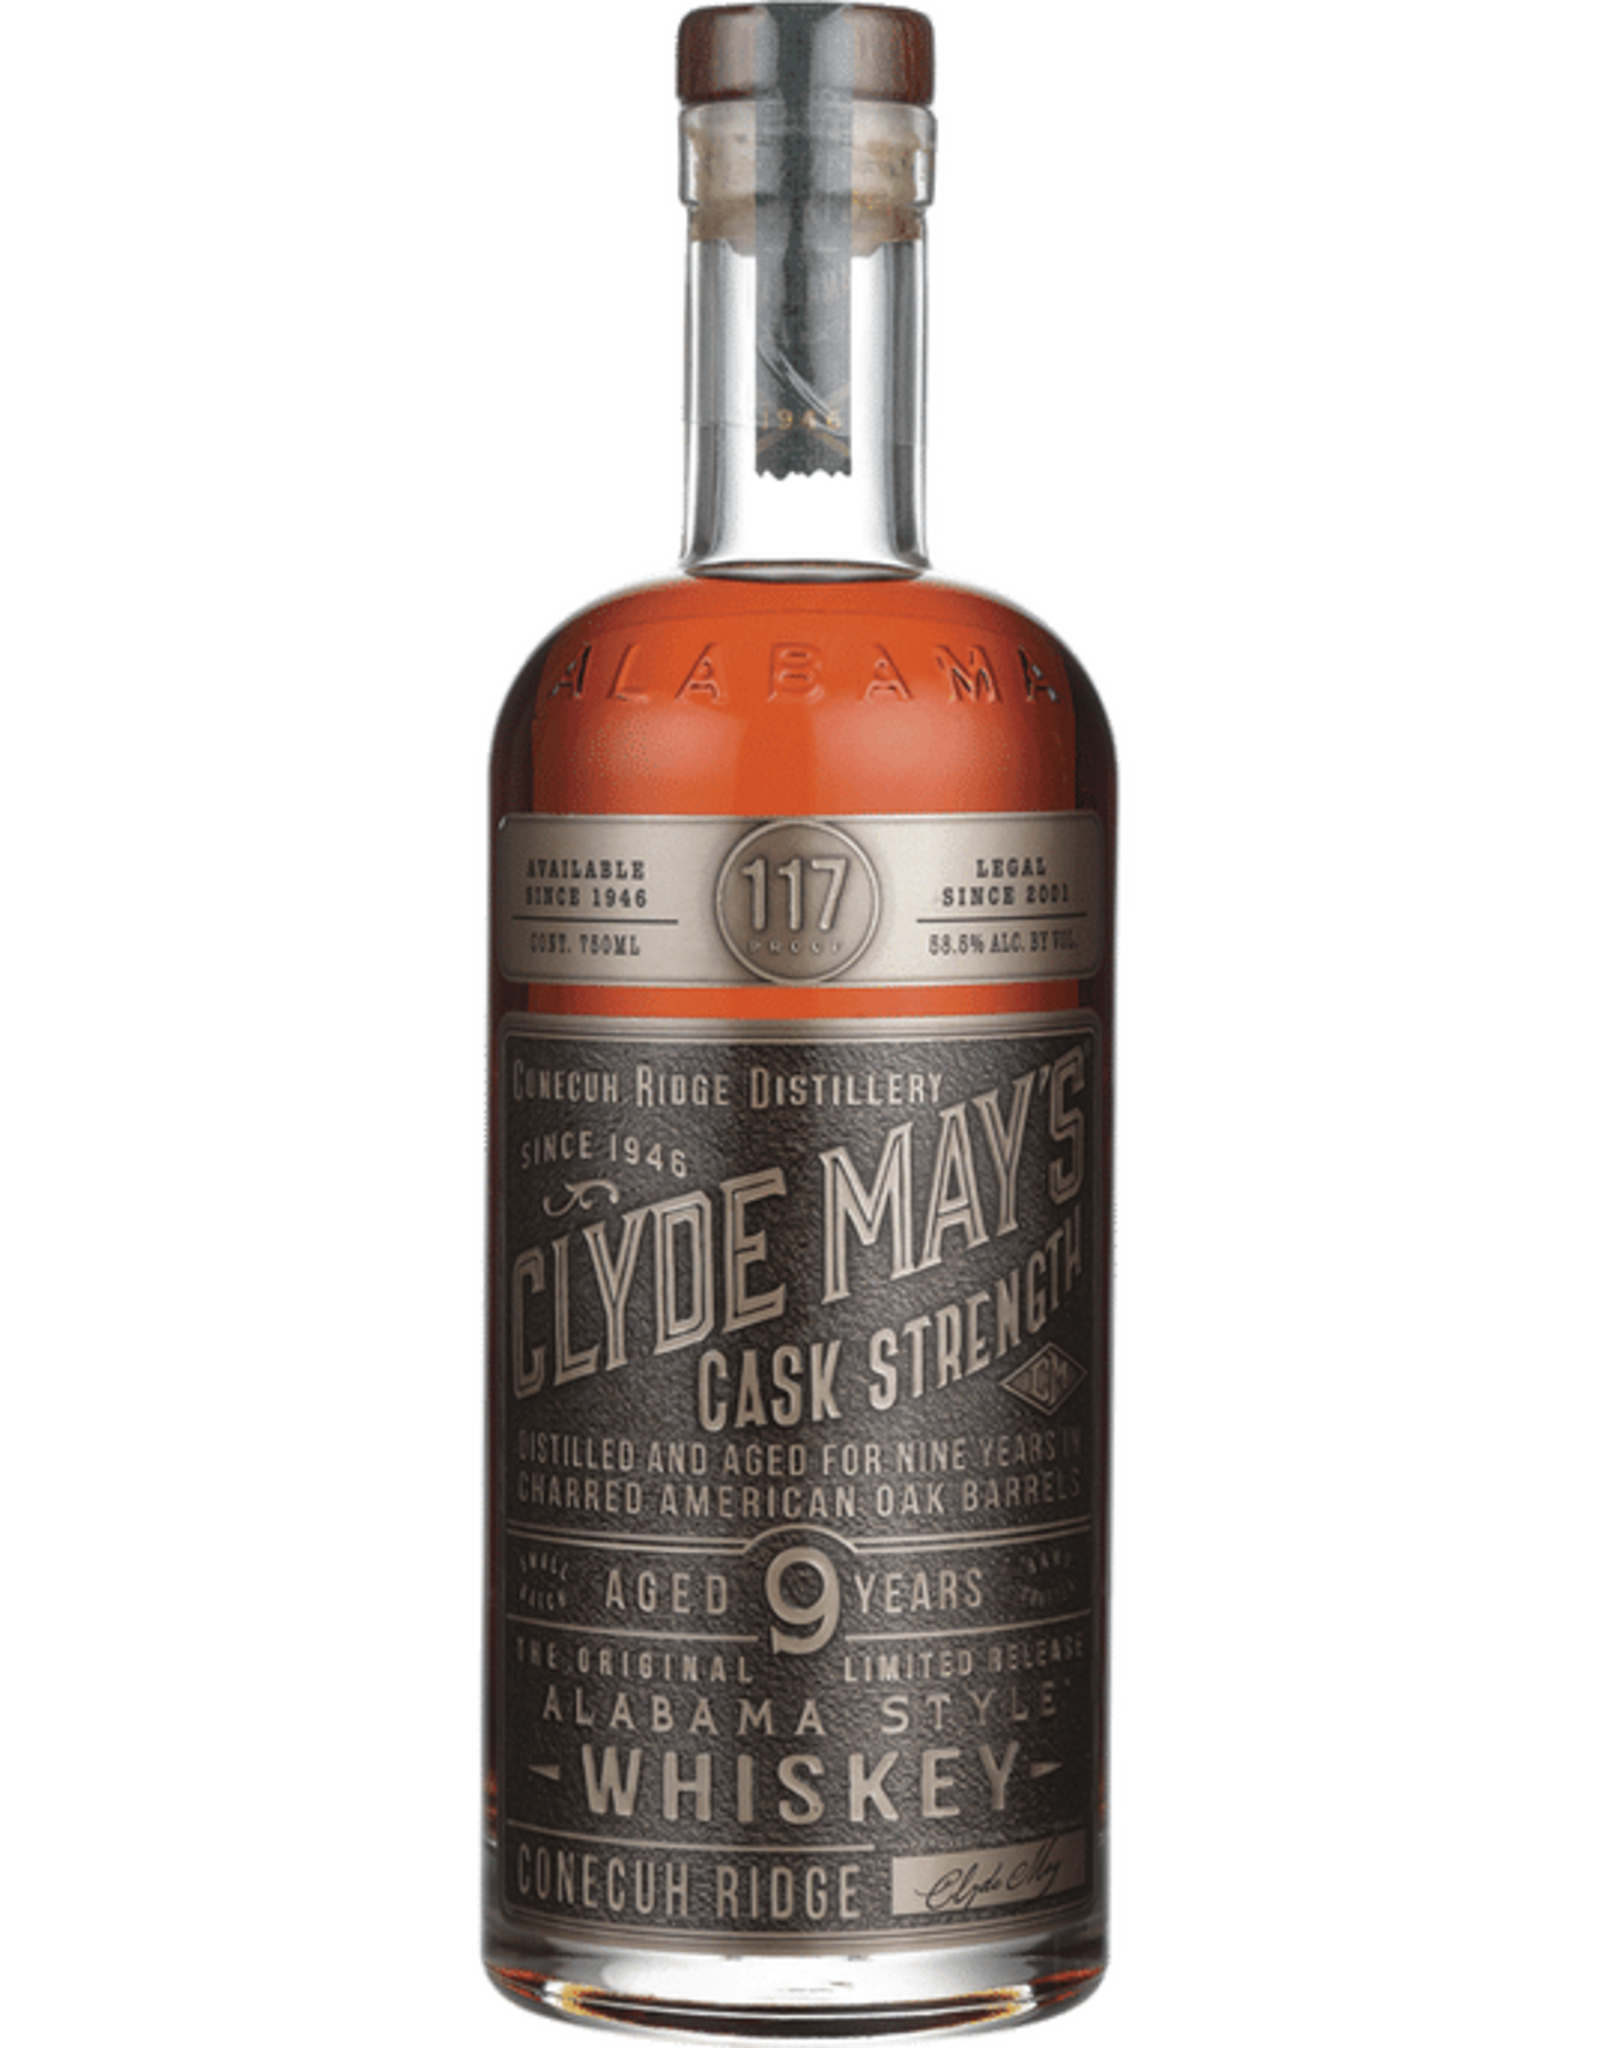 Clyde May's Cask Strength 9 year Alabama Whiskey